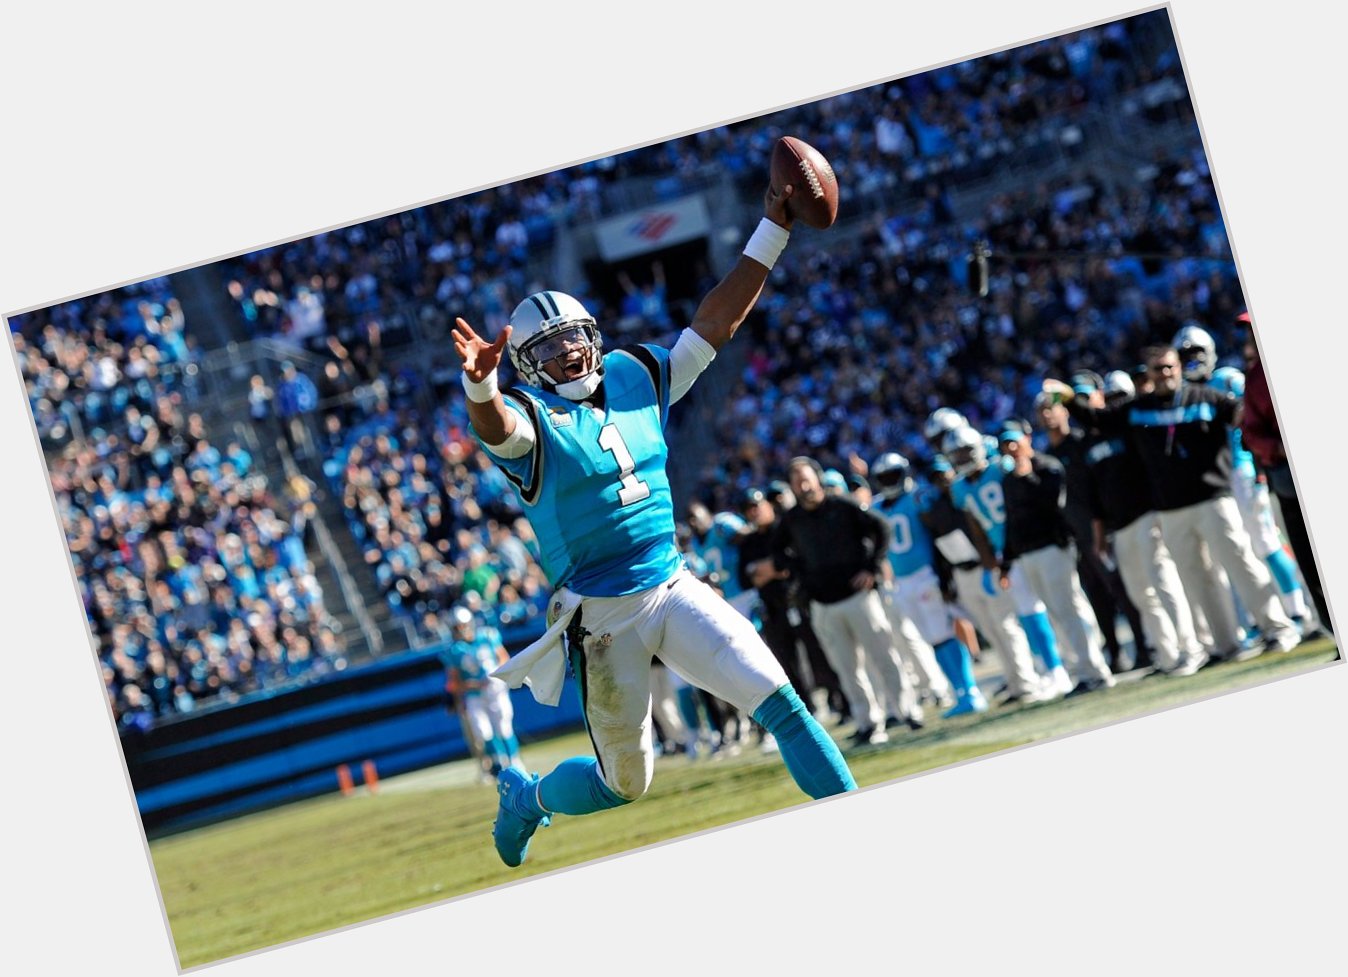 Happy 31st Birthday Cam Newton! He has the most rushing touchdowns all-time among quarterbacks with 58. 